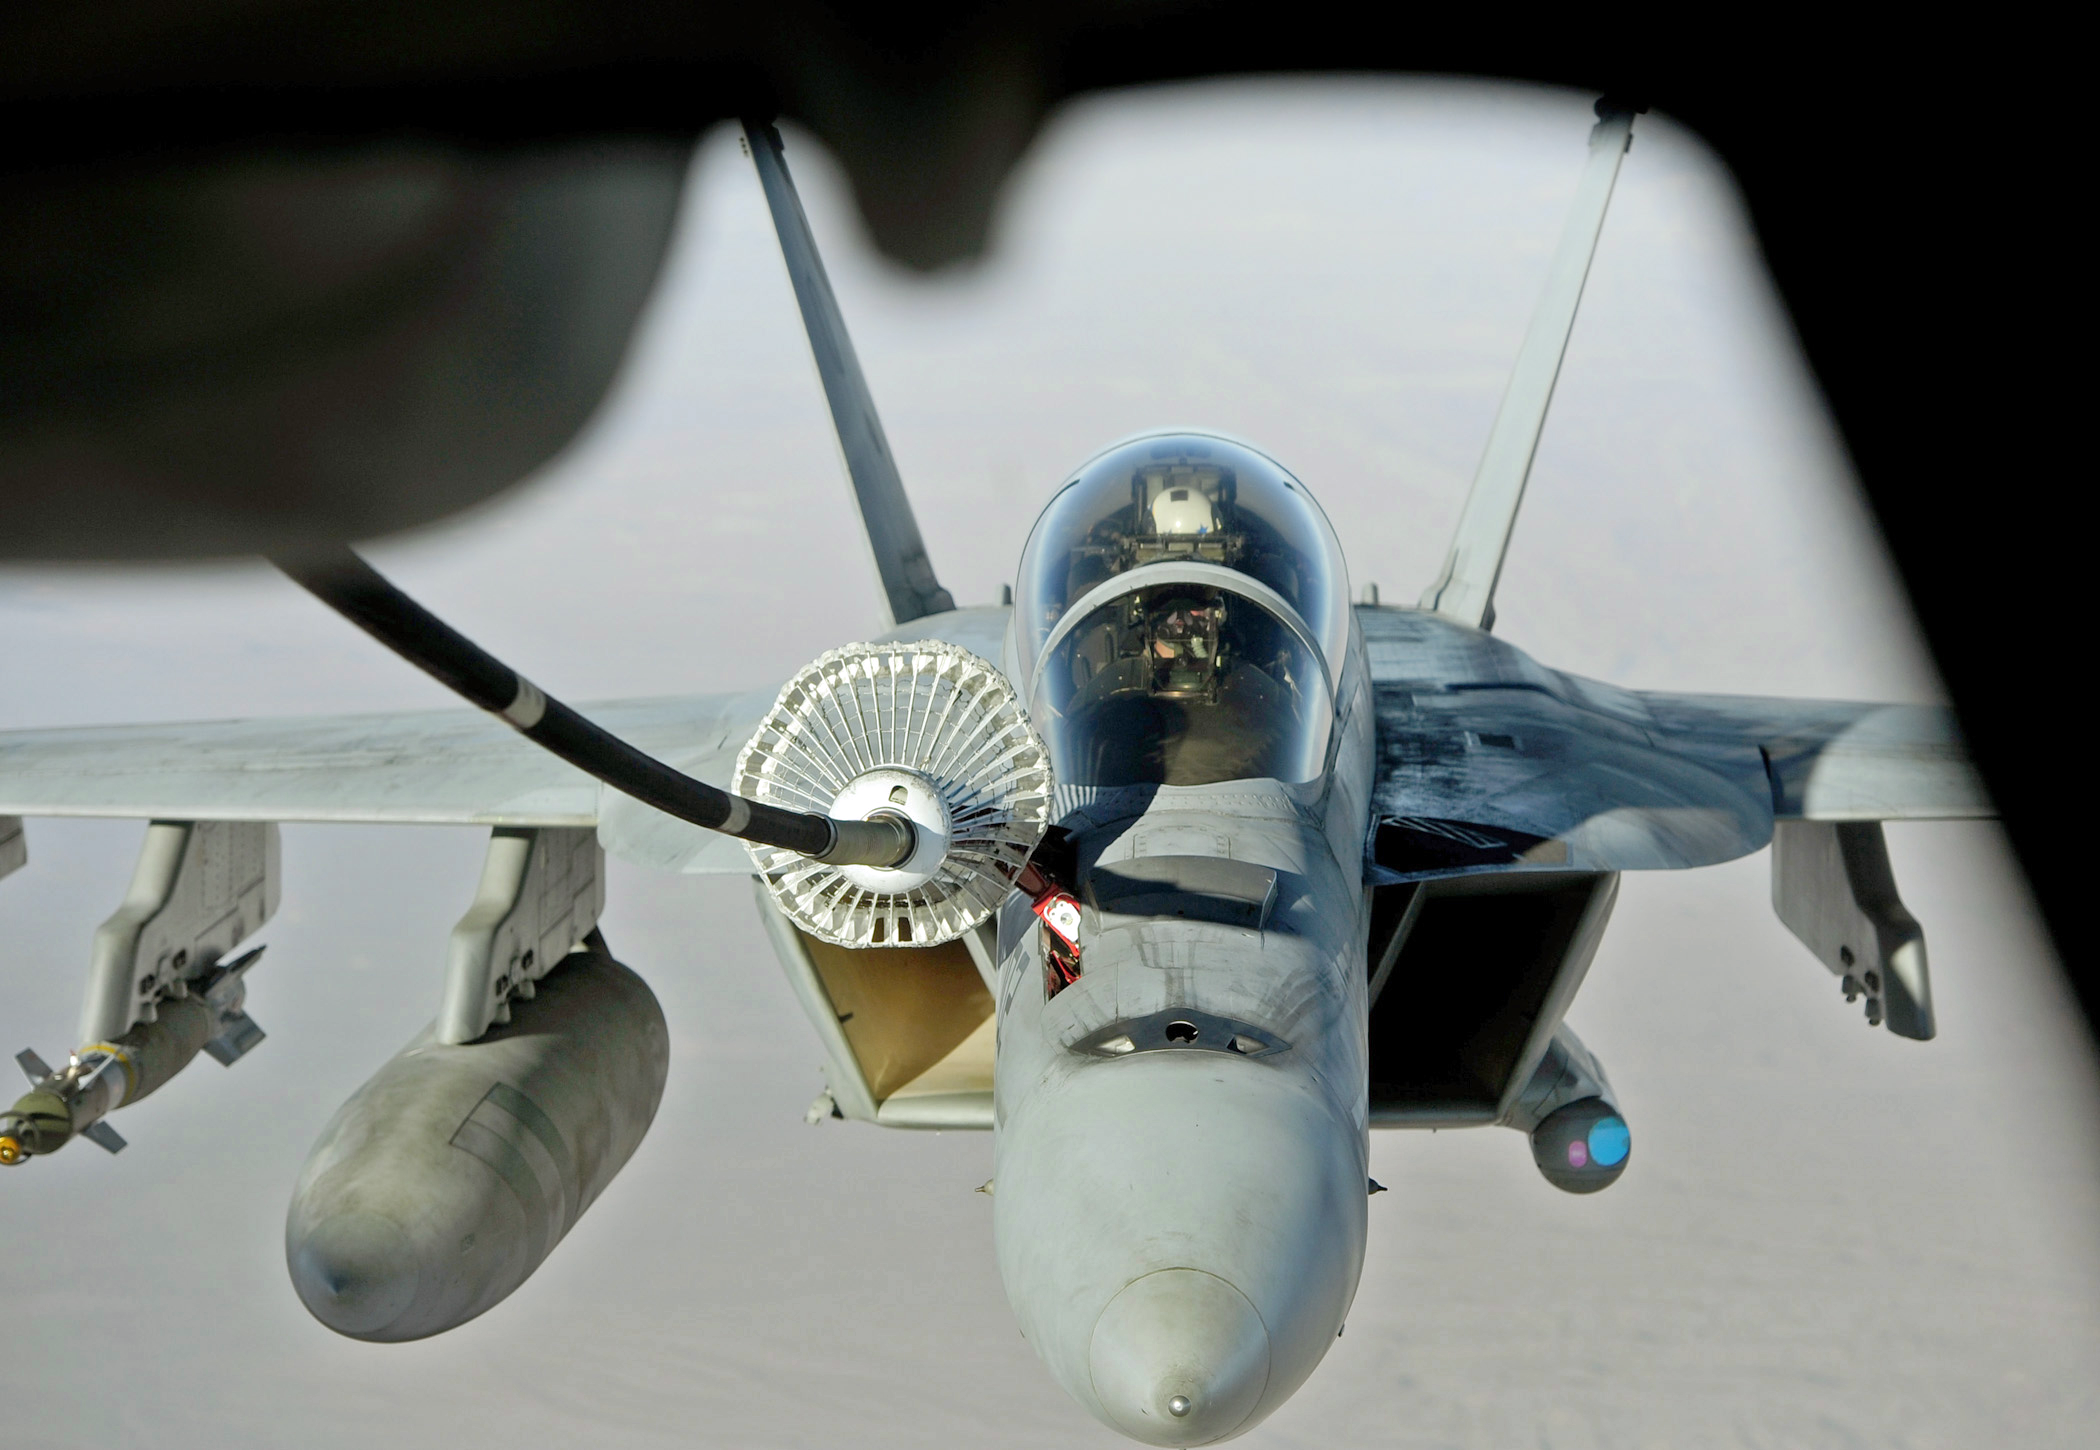 General 2100x1450 aircraft military aircraft vehicle military McDonnell Douglas F/A-18 Hornet American aircraft